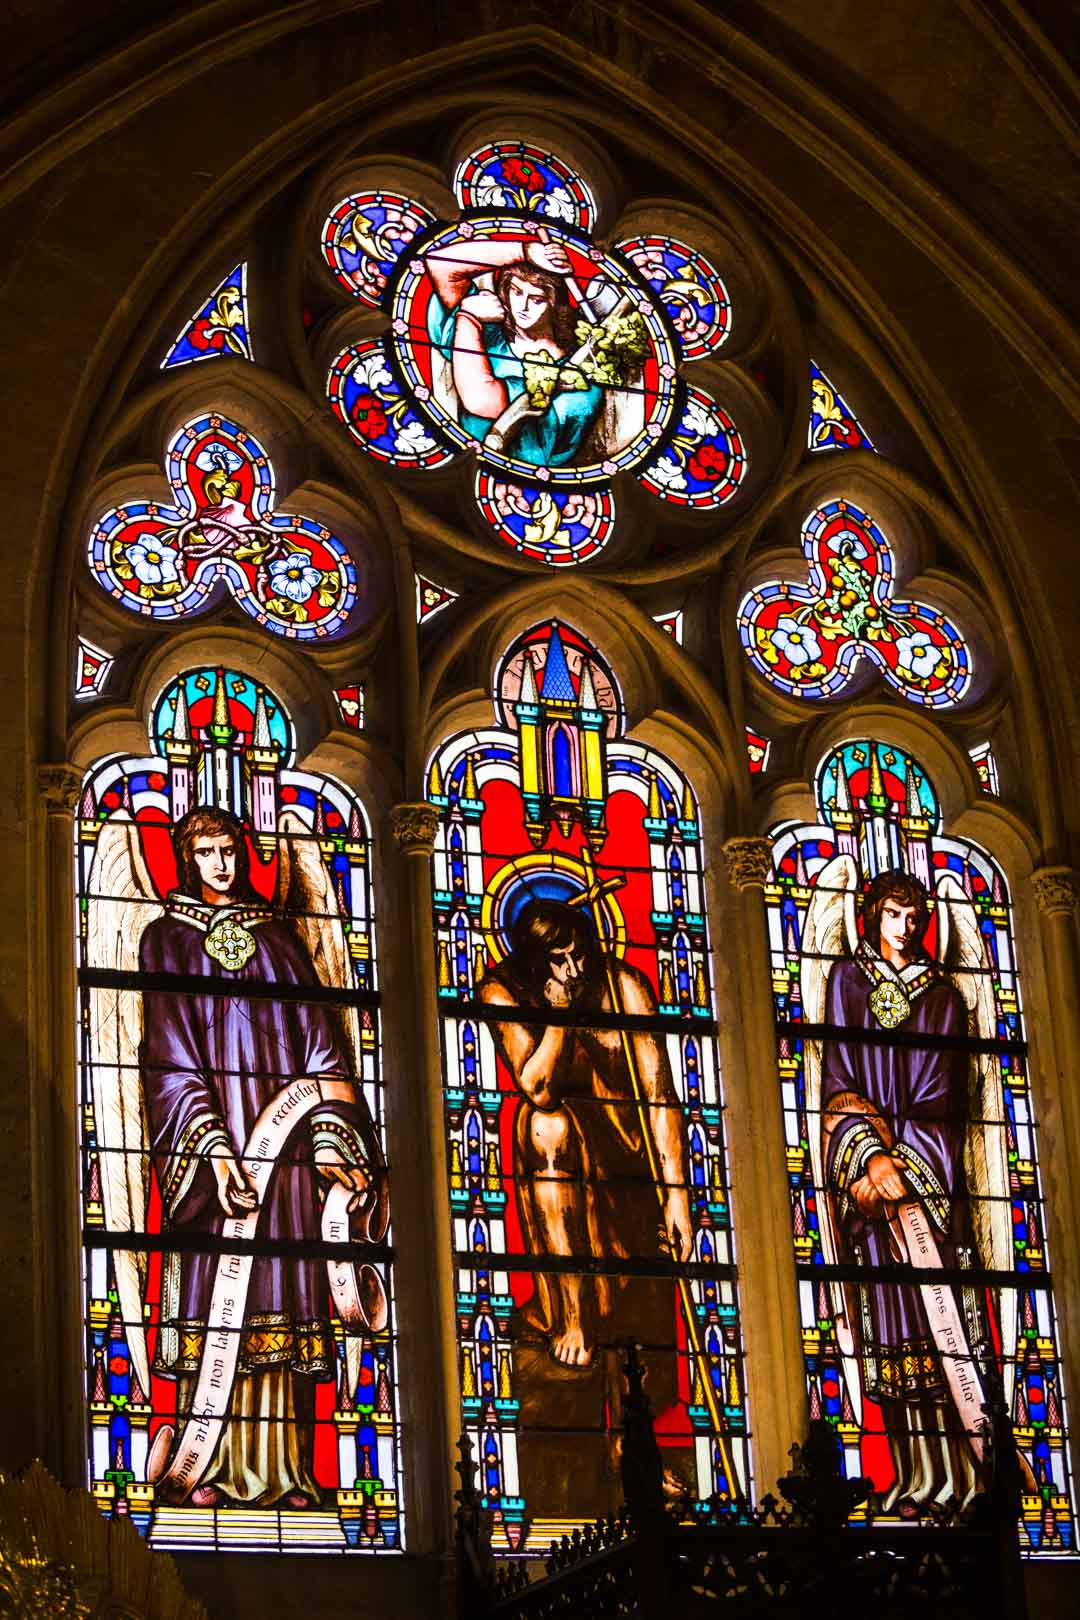 the beautiful stained glass window of the church saint germain l'auxerrois paris